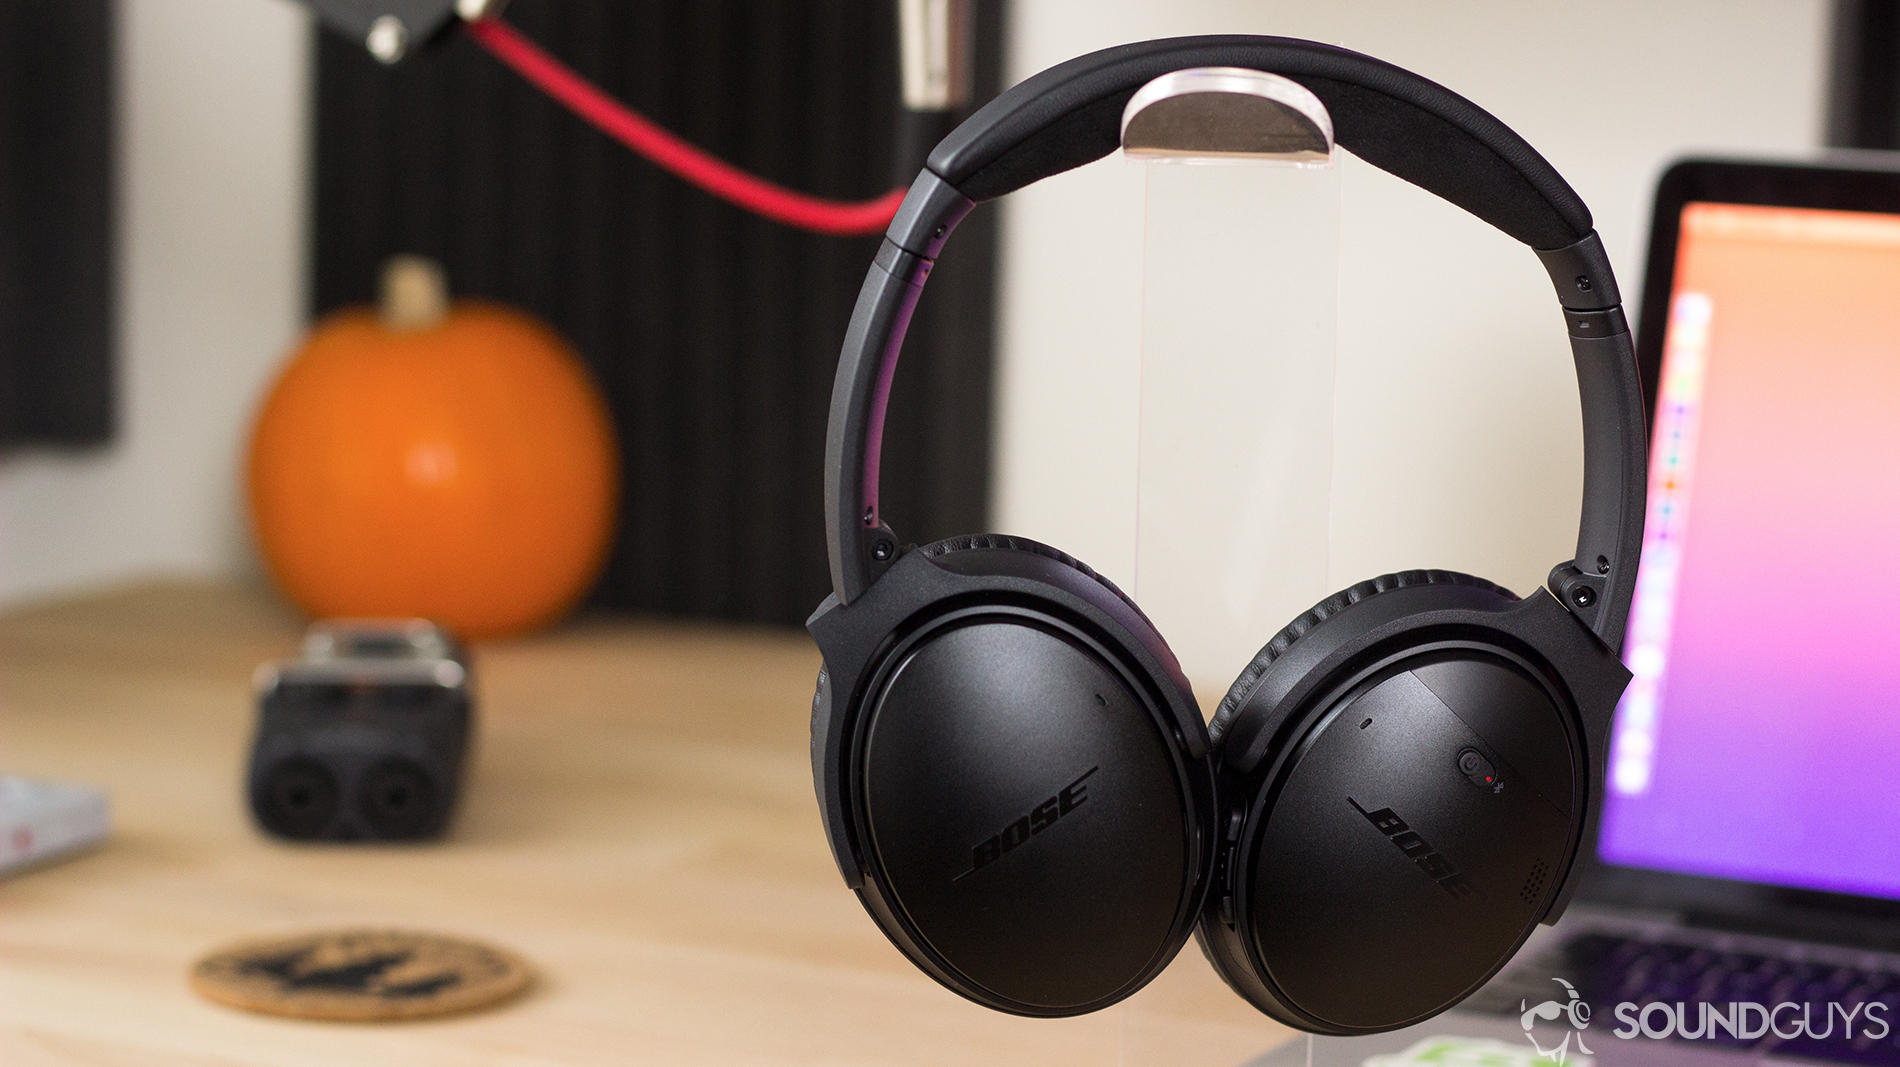 A picture of the Bose QuietComfort 35 II headphones on a headphone stand in front of a computer and pumpkin.